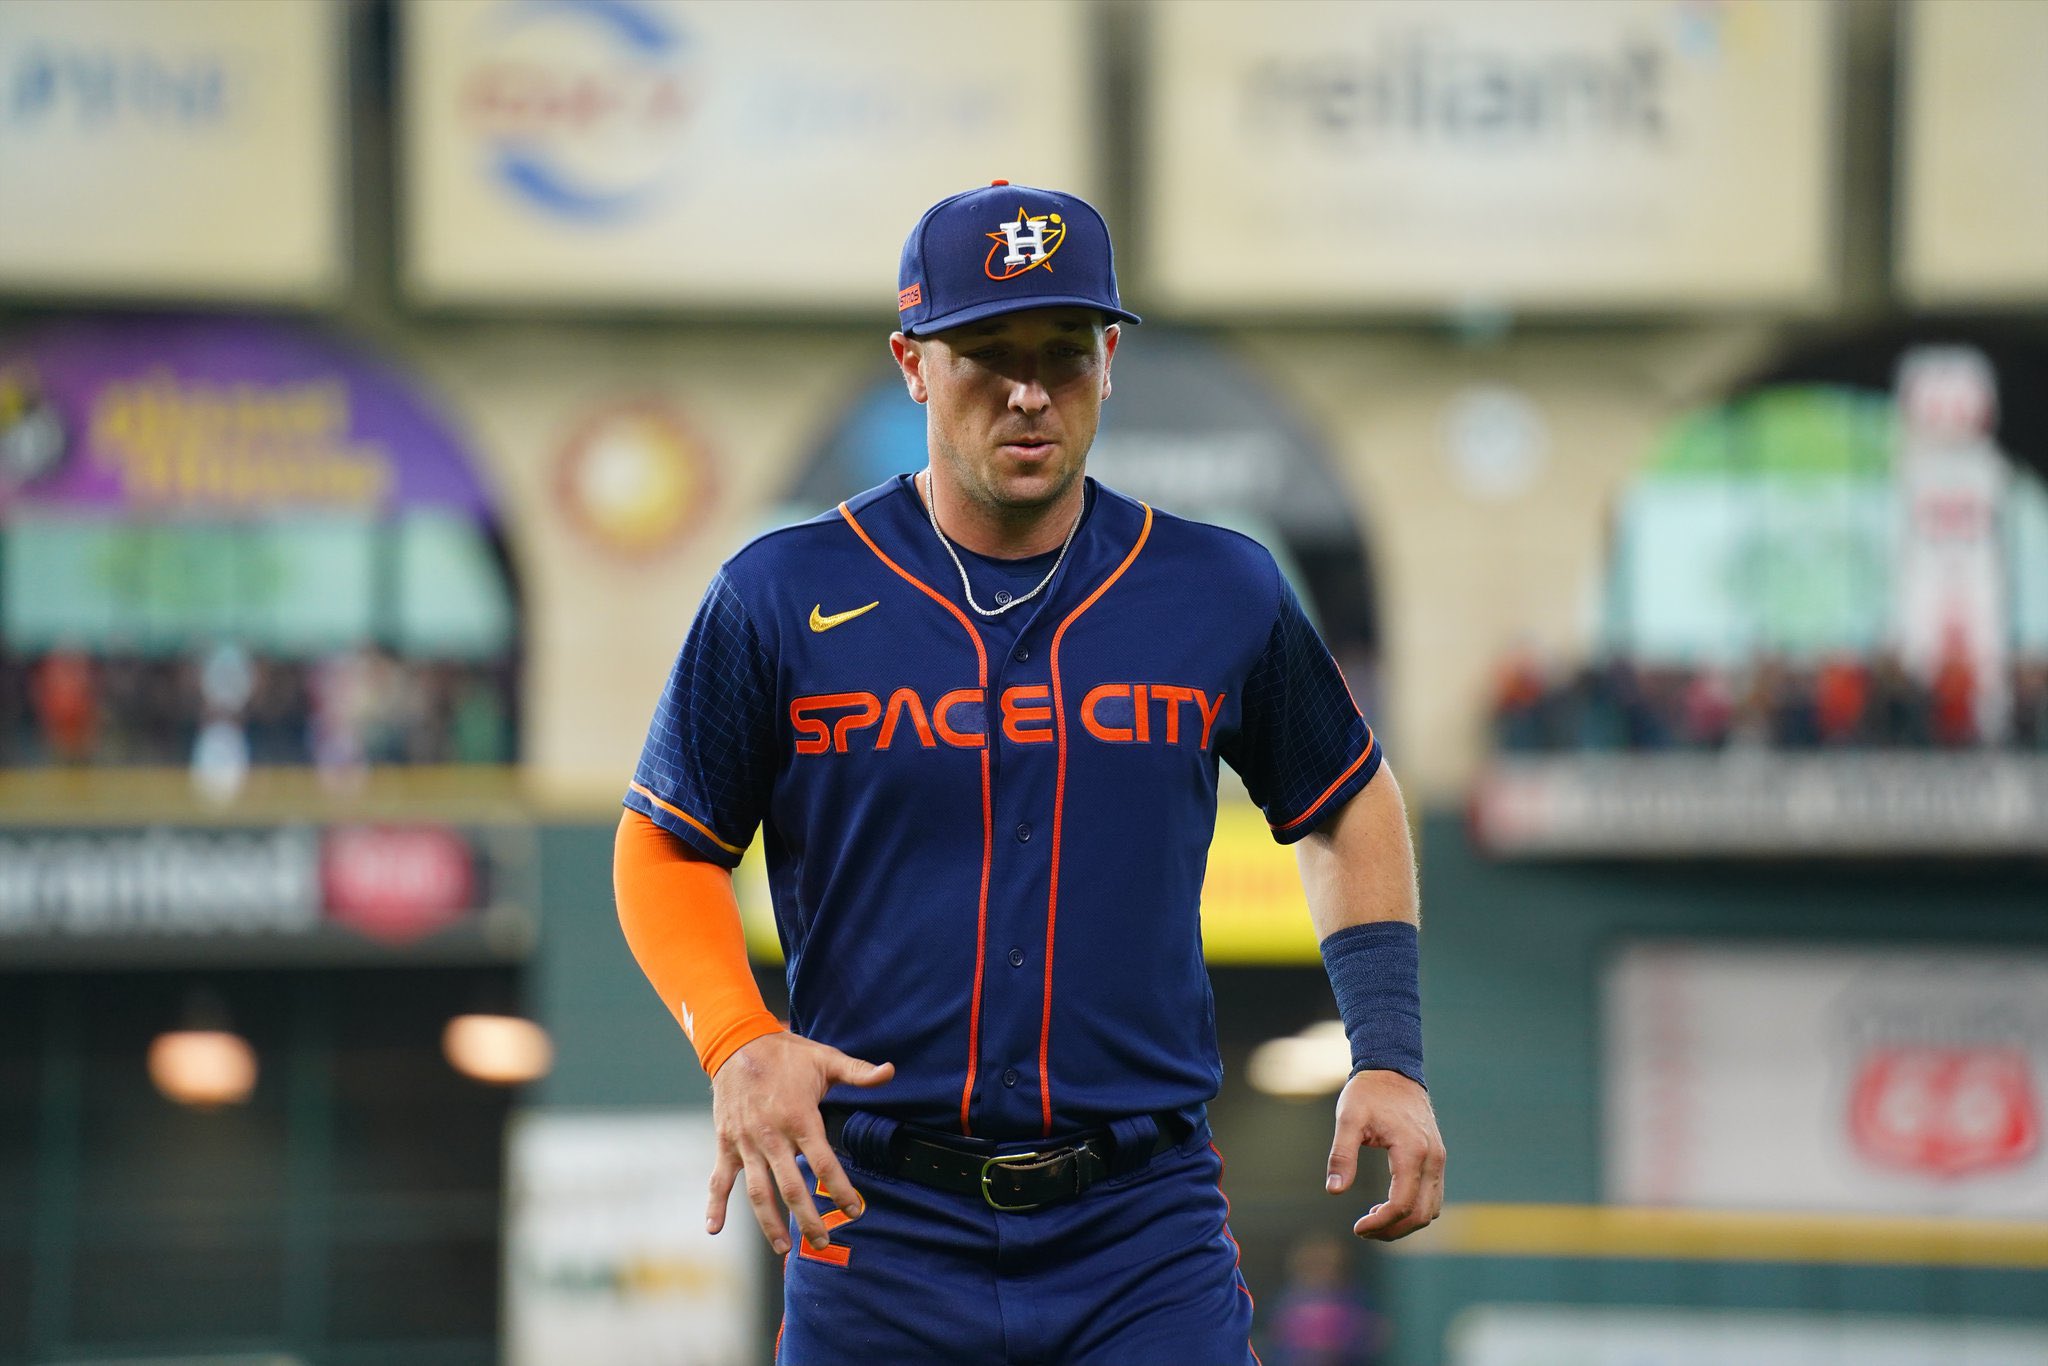 Stadium on X: The Astros are debuting their Space City uniforms